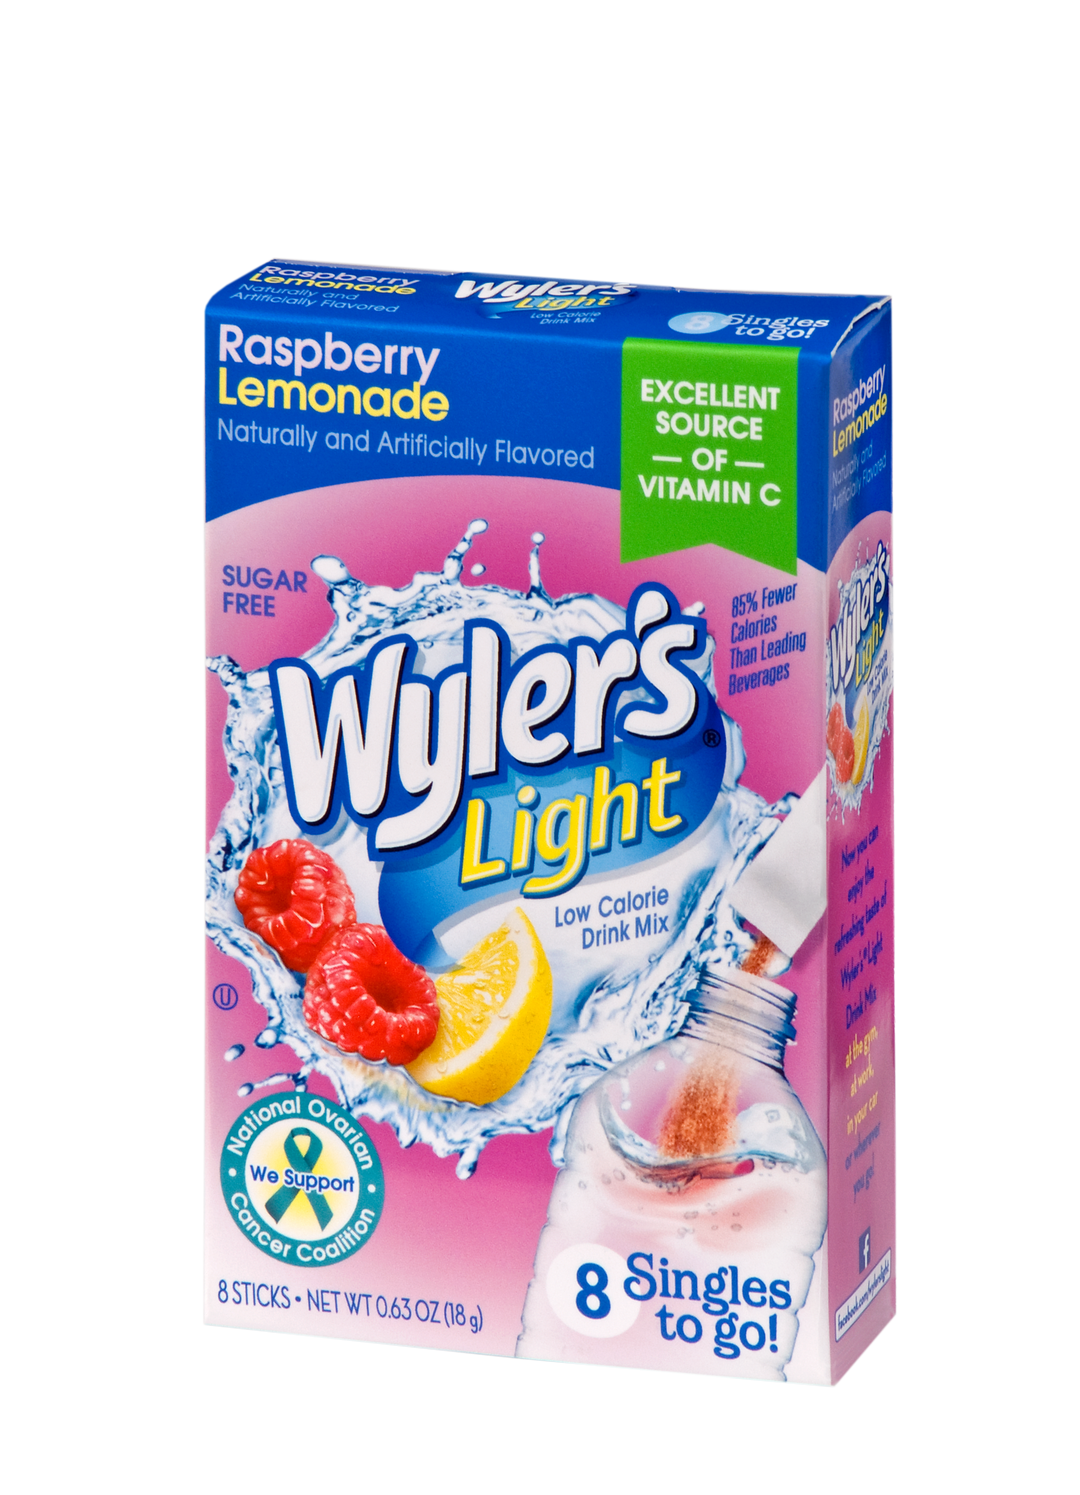 Wylers Light Raspberry Lemonade Drink Mix Singles To Go-8 Count-12/Case